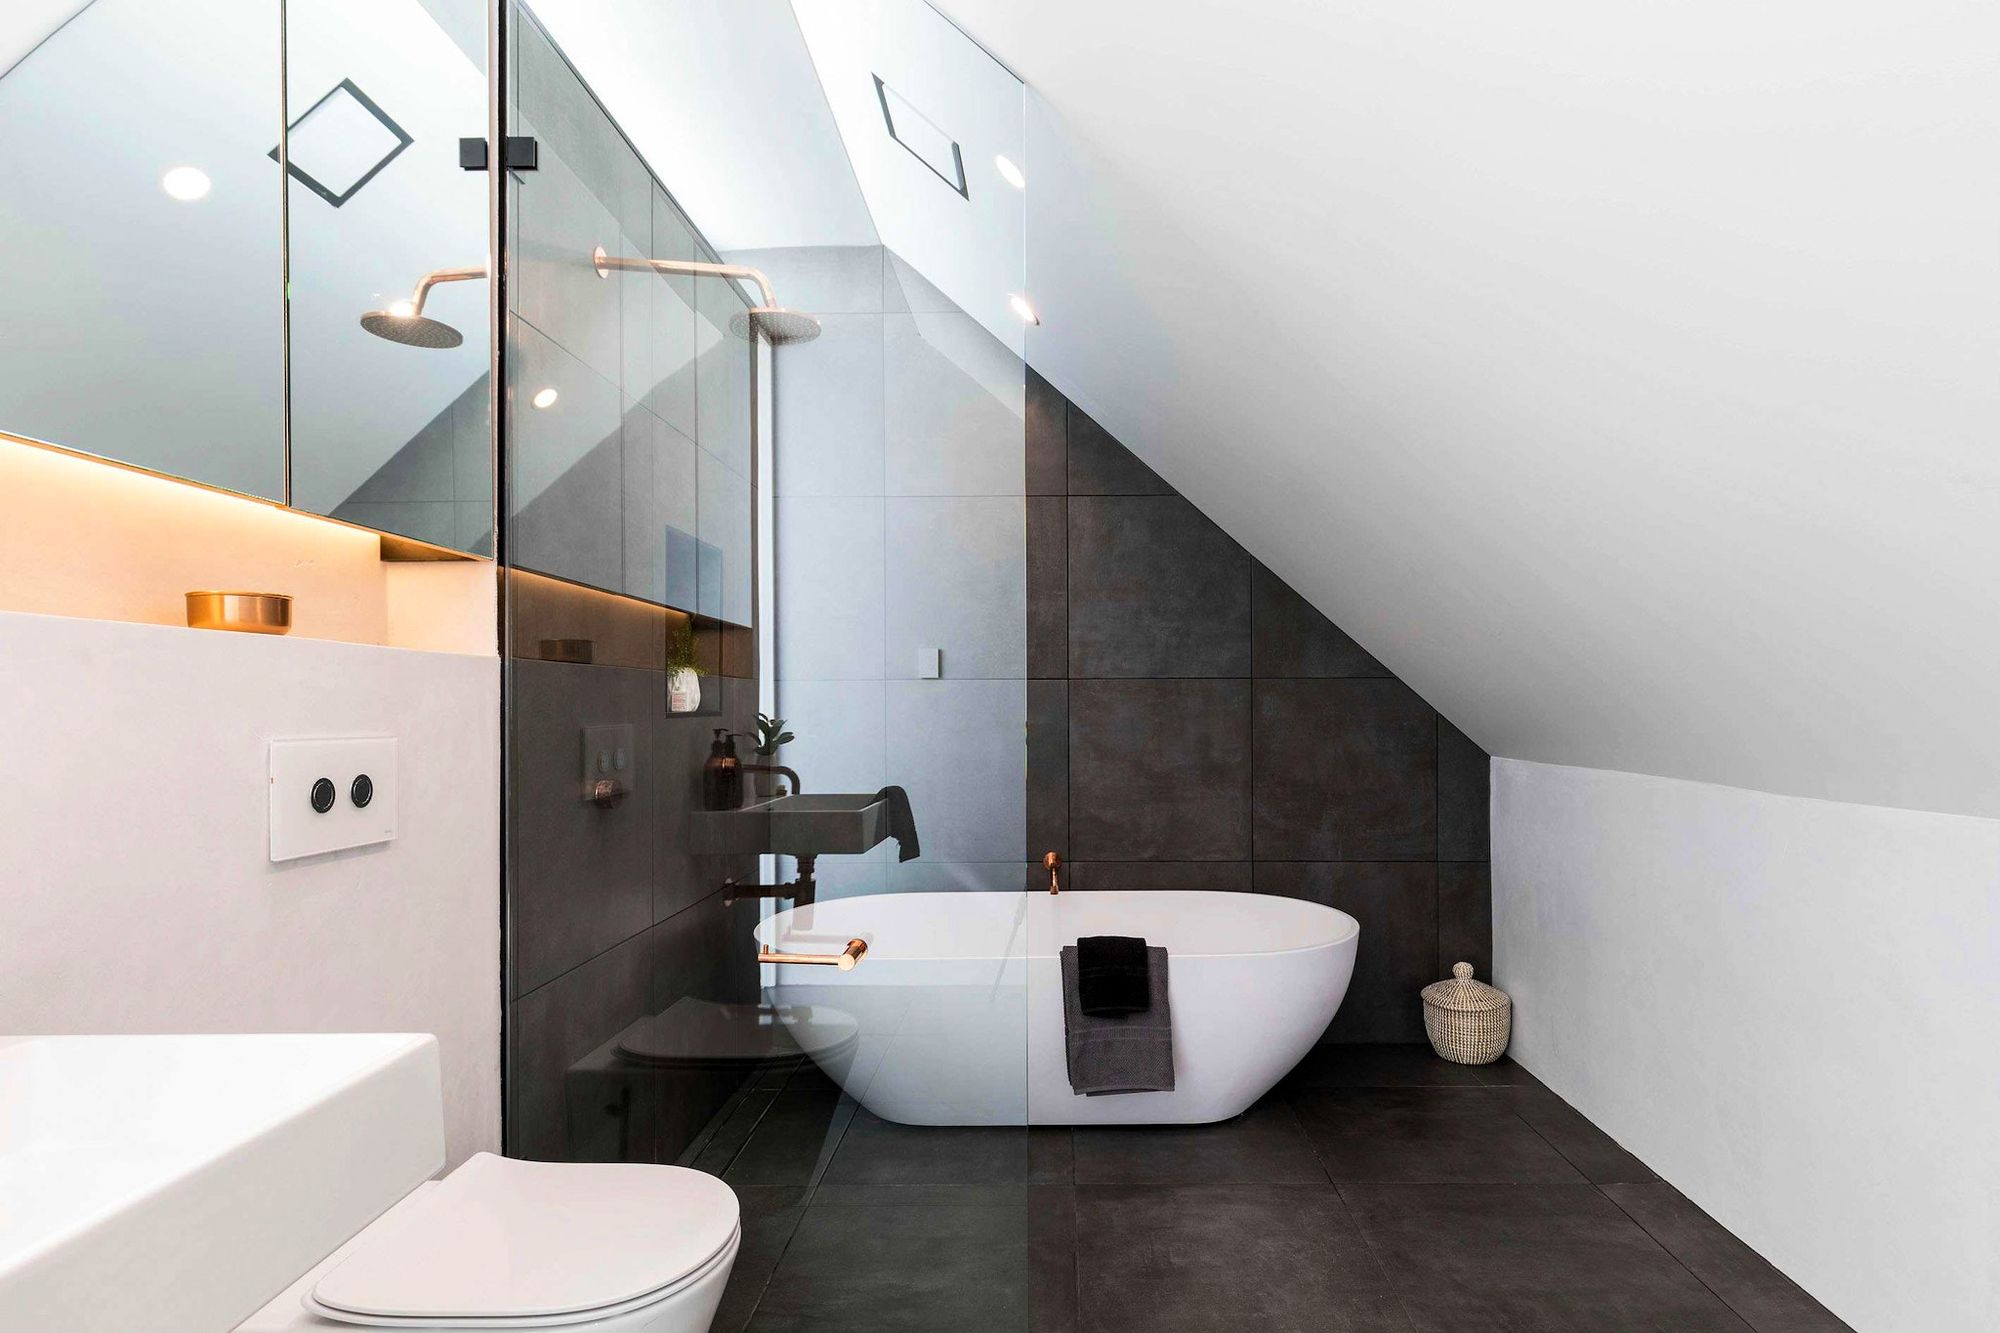 Darlinghurst Residence by JKMarchitects showing internal view of bathroom with standalone bathtub